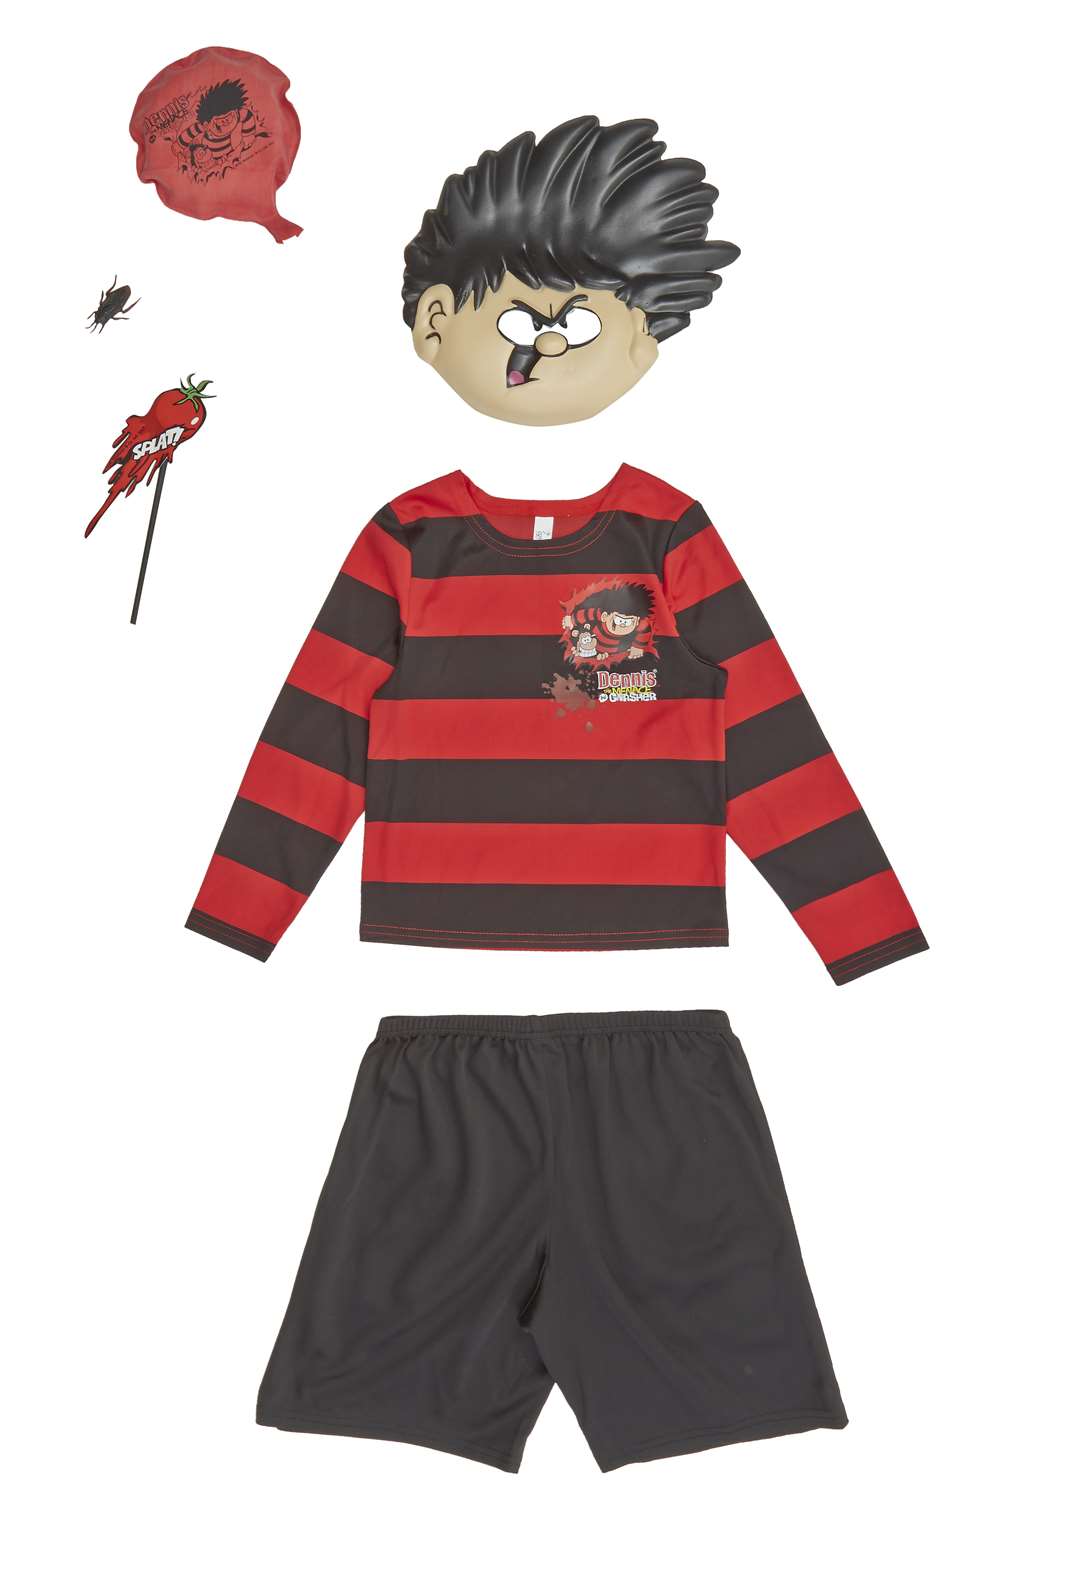 Asda's Dennis the Menace outfit